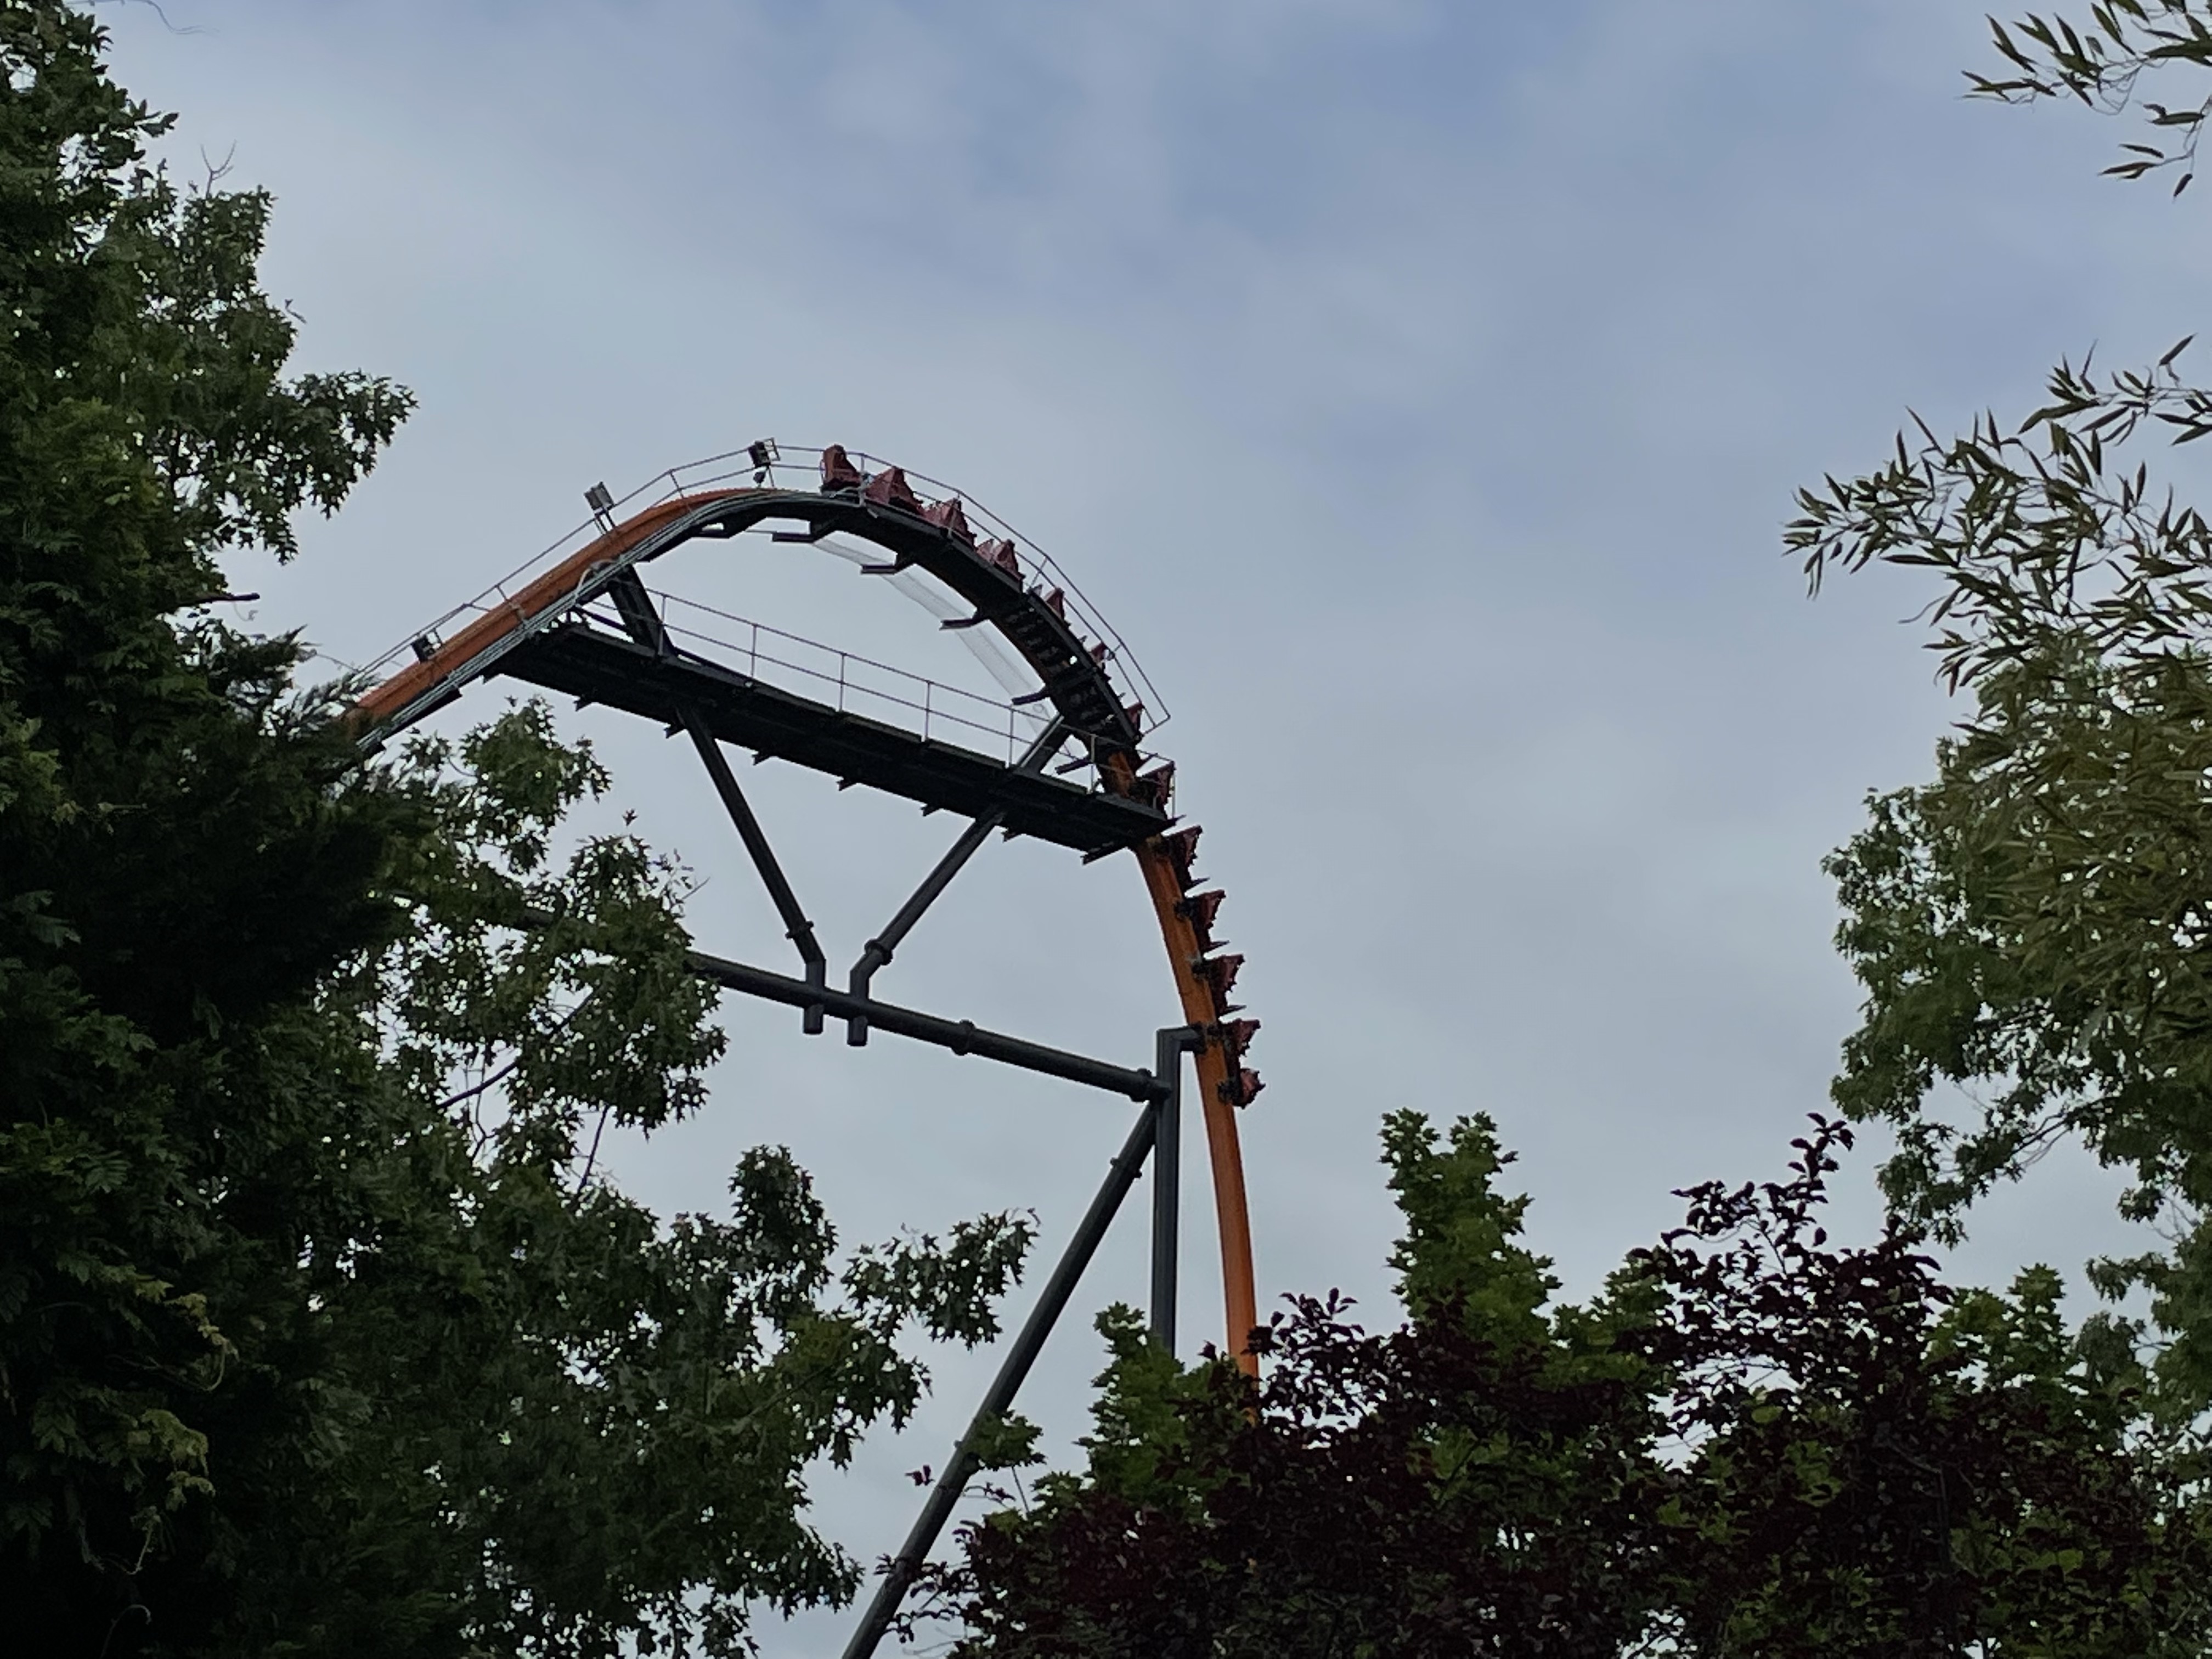 Jersey Devil Coaster coming to Six Flags Great Adventure will be tallest,  fastest, longest roller coaster in world